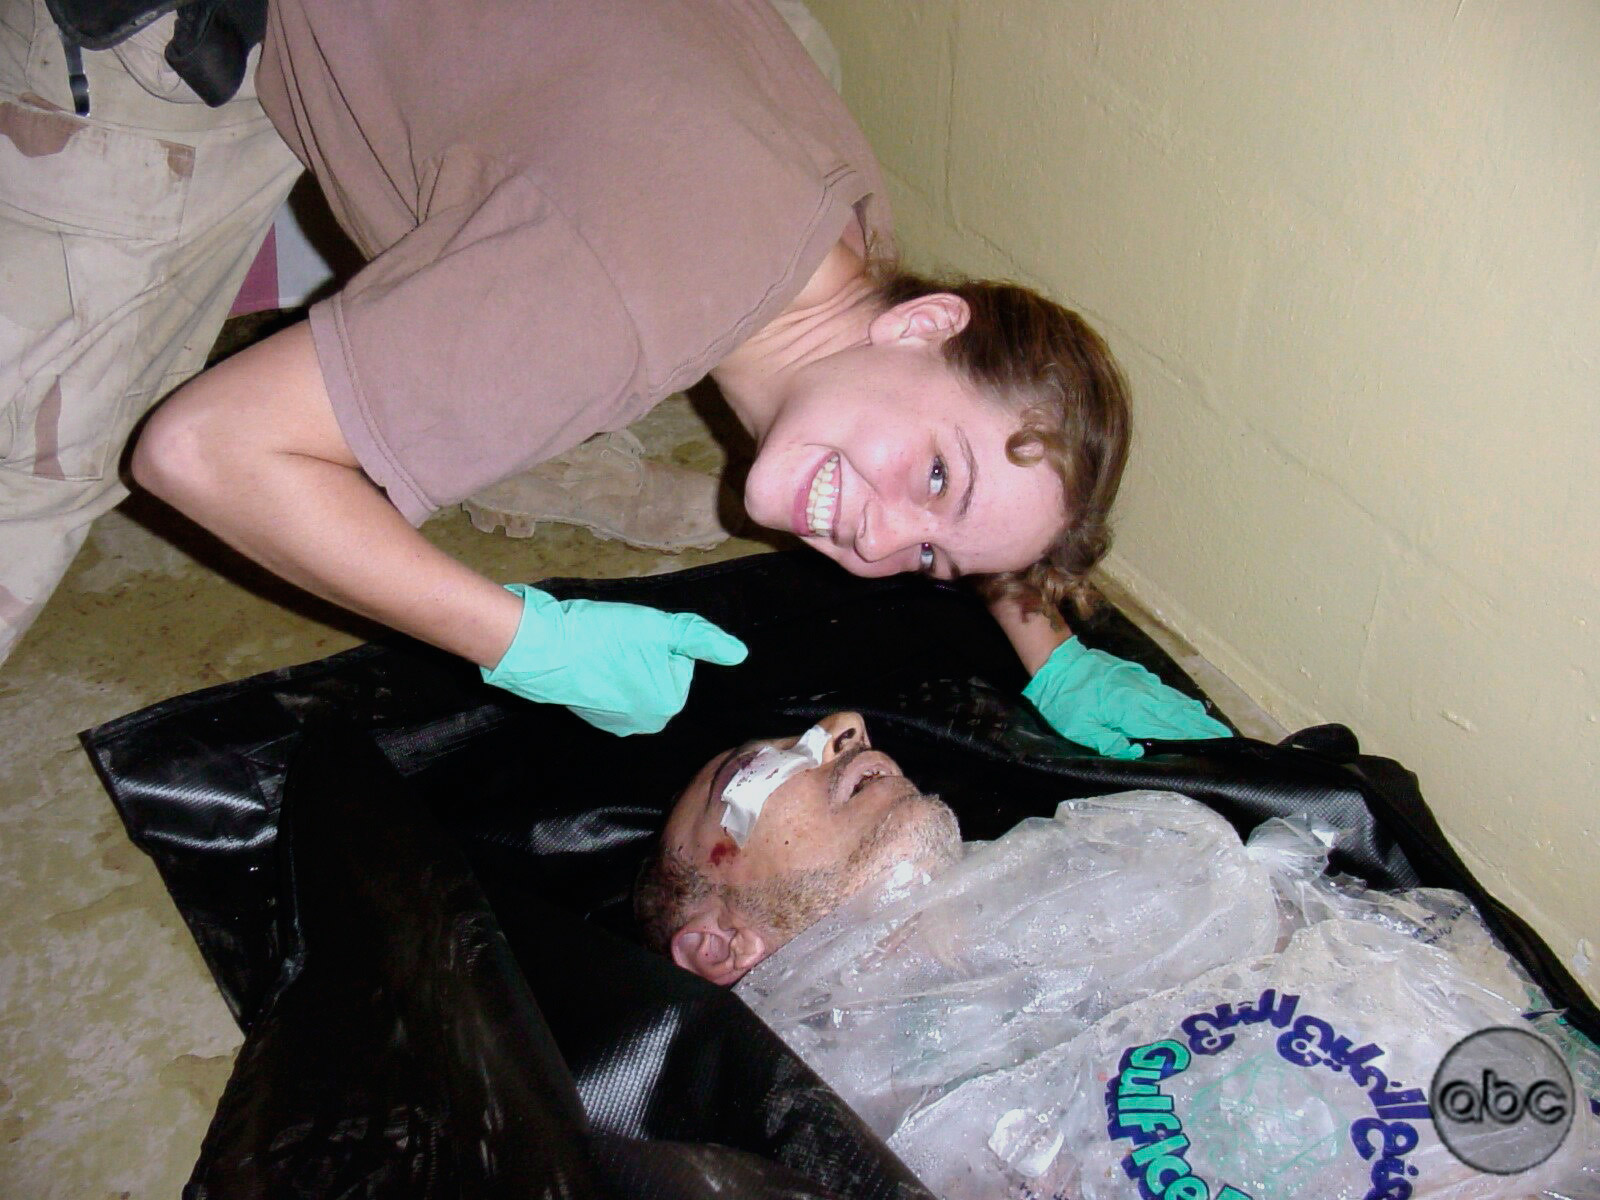 Army Spc. Sabrina Harman poses with the body of an Iraqi detainee at the Abu Ghraib prison in Baghdad, Iraq, 2003.